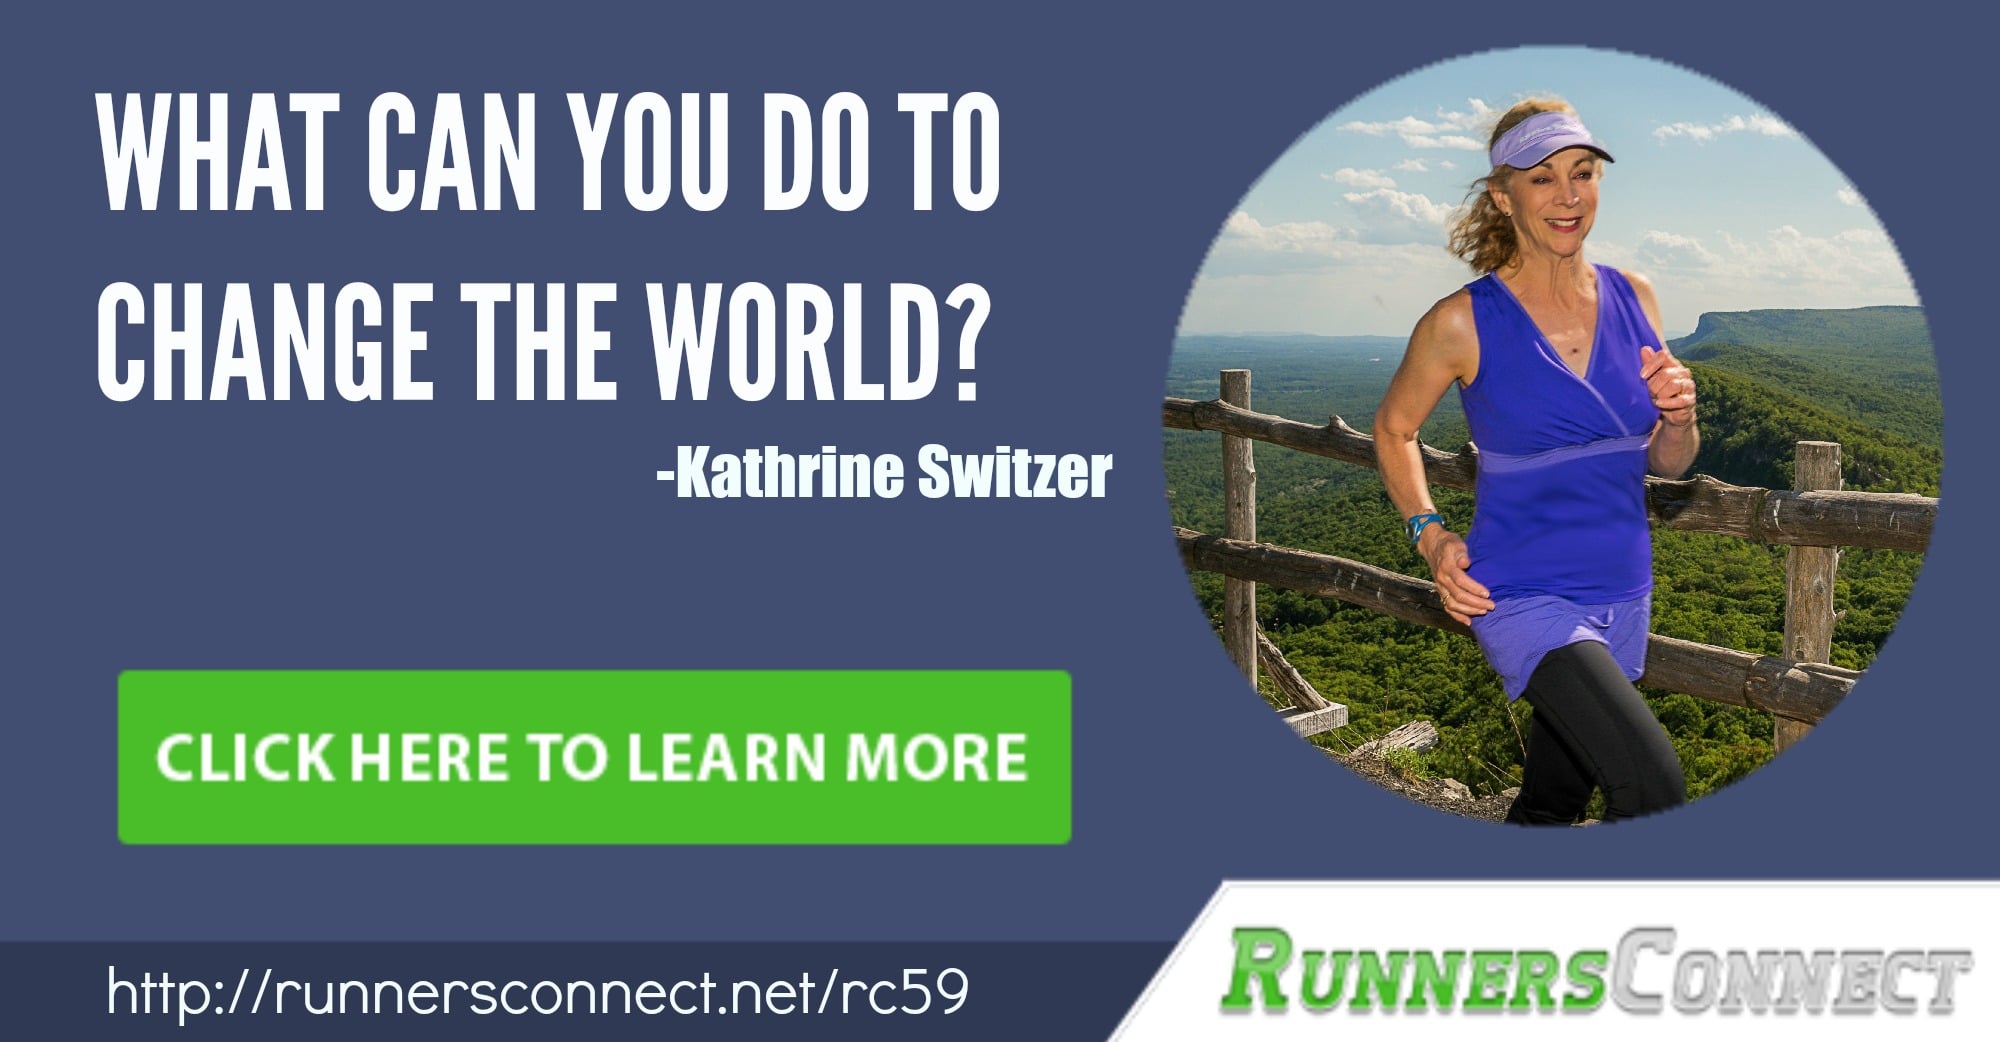 Listen to this inspiring interview with Kathrine Switzer about that historic day at the Boston Marathon, and she talks about the importance of running and runners in creating freedom for people all over the world.